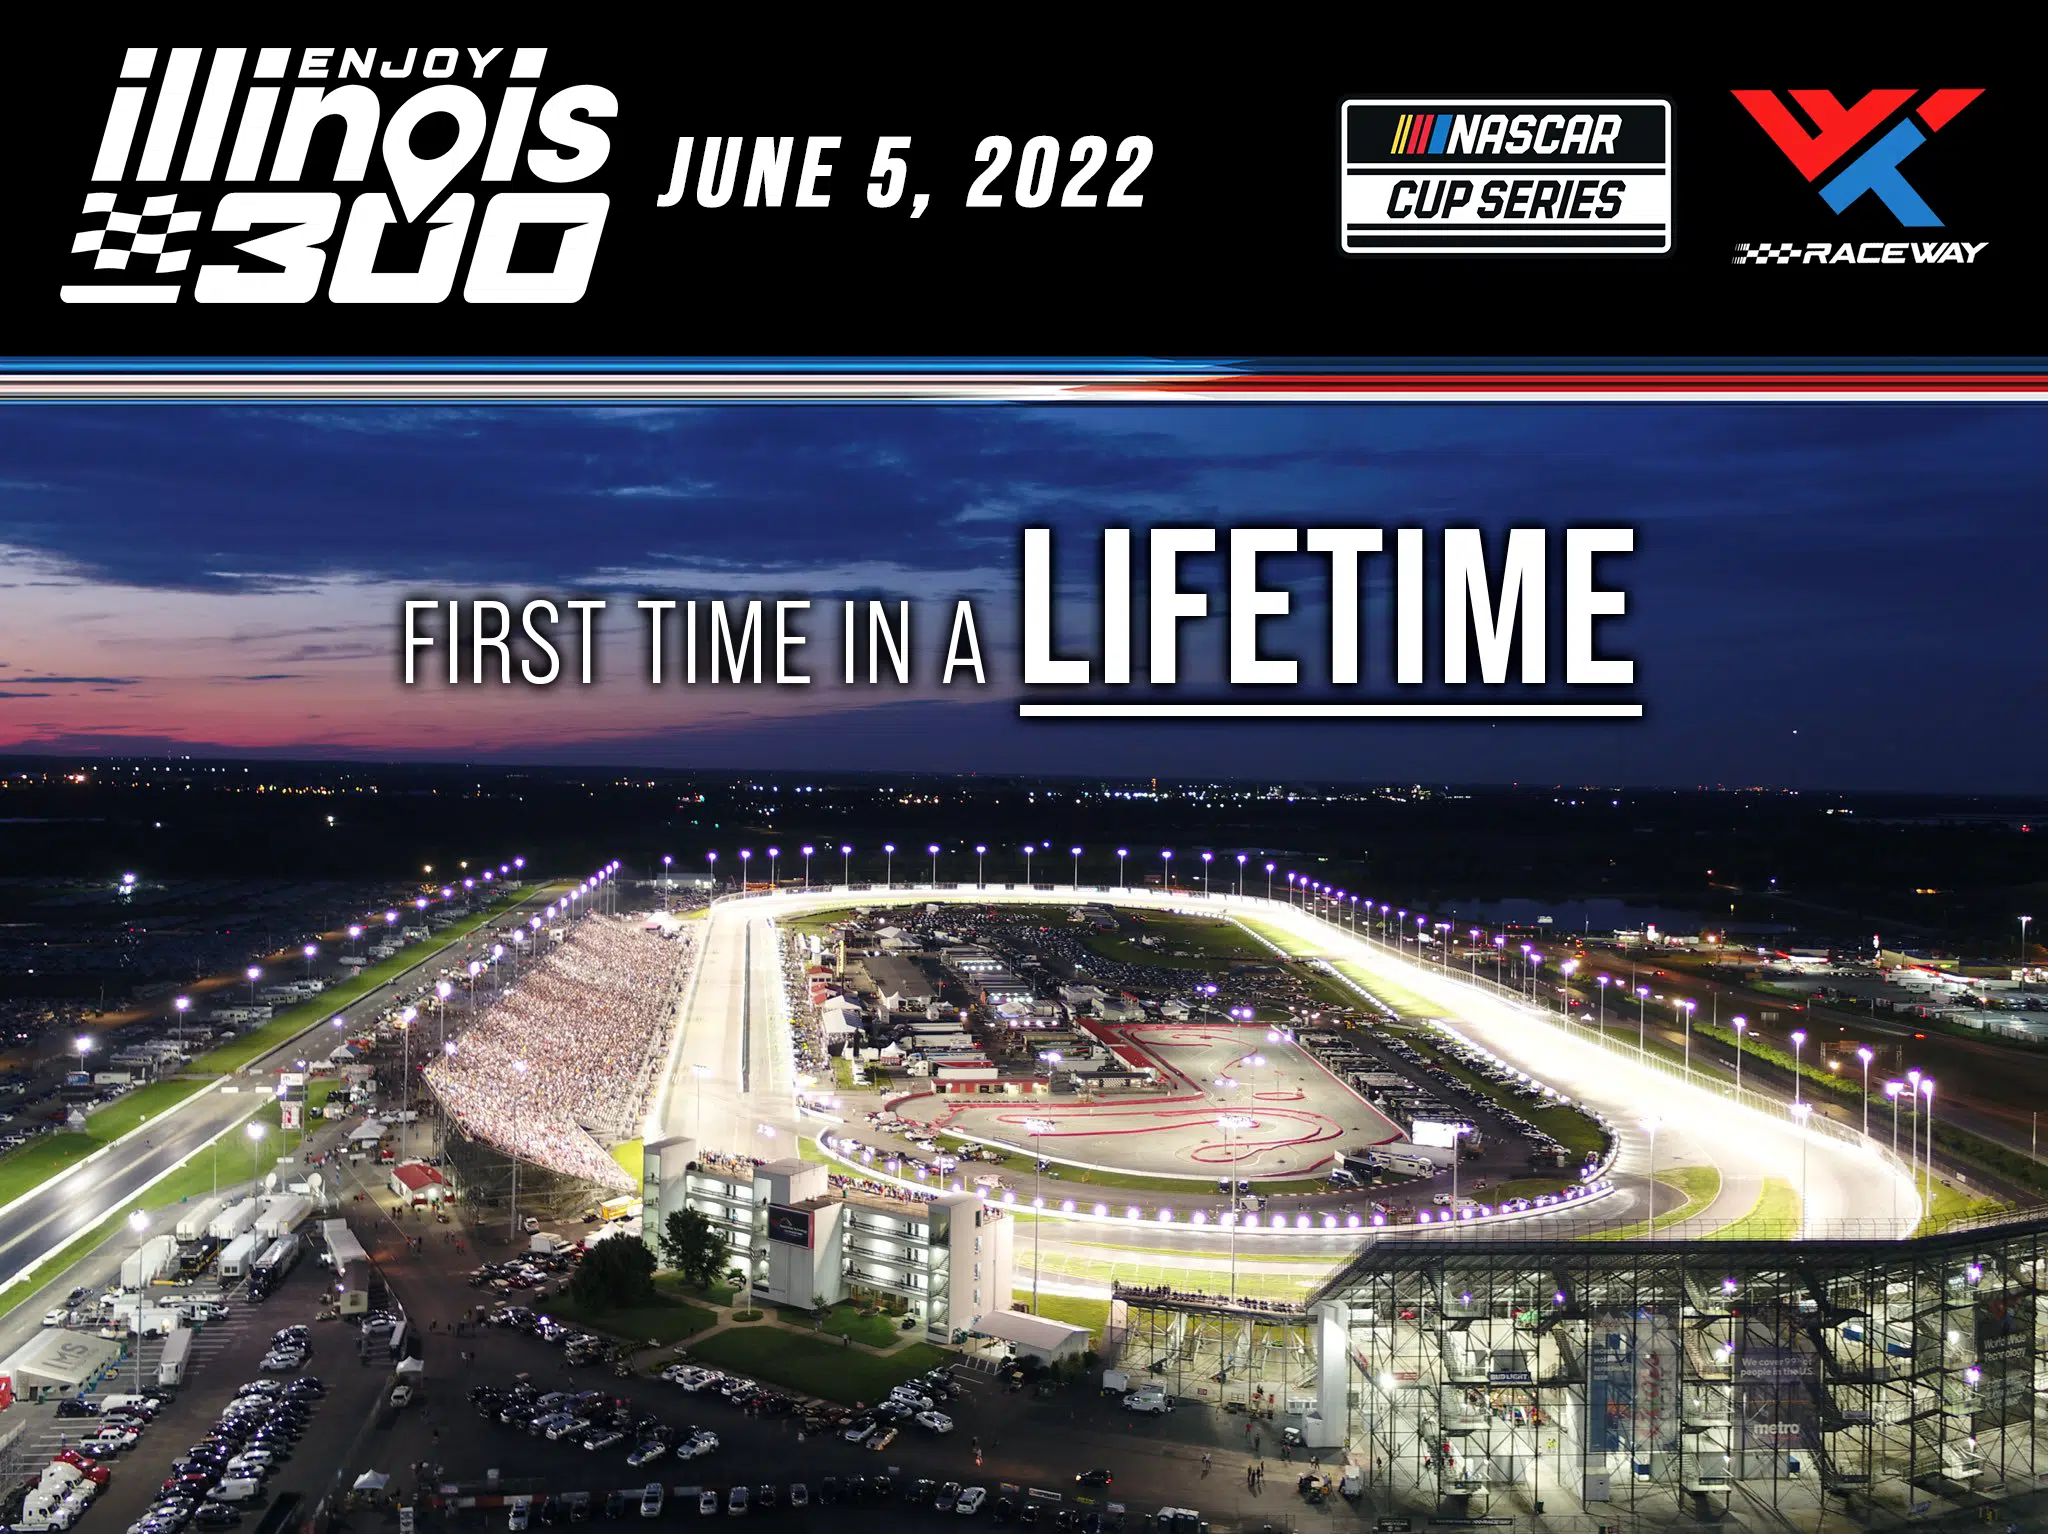 Its Official NASCAR Cup Series Race at World Wide Technology Raceway (WWTR) Named Enjoy Illinois 300 MyRadioLink